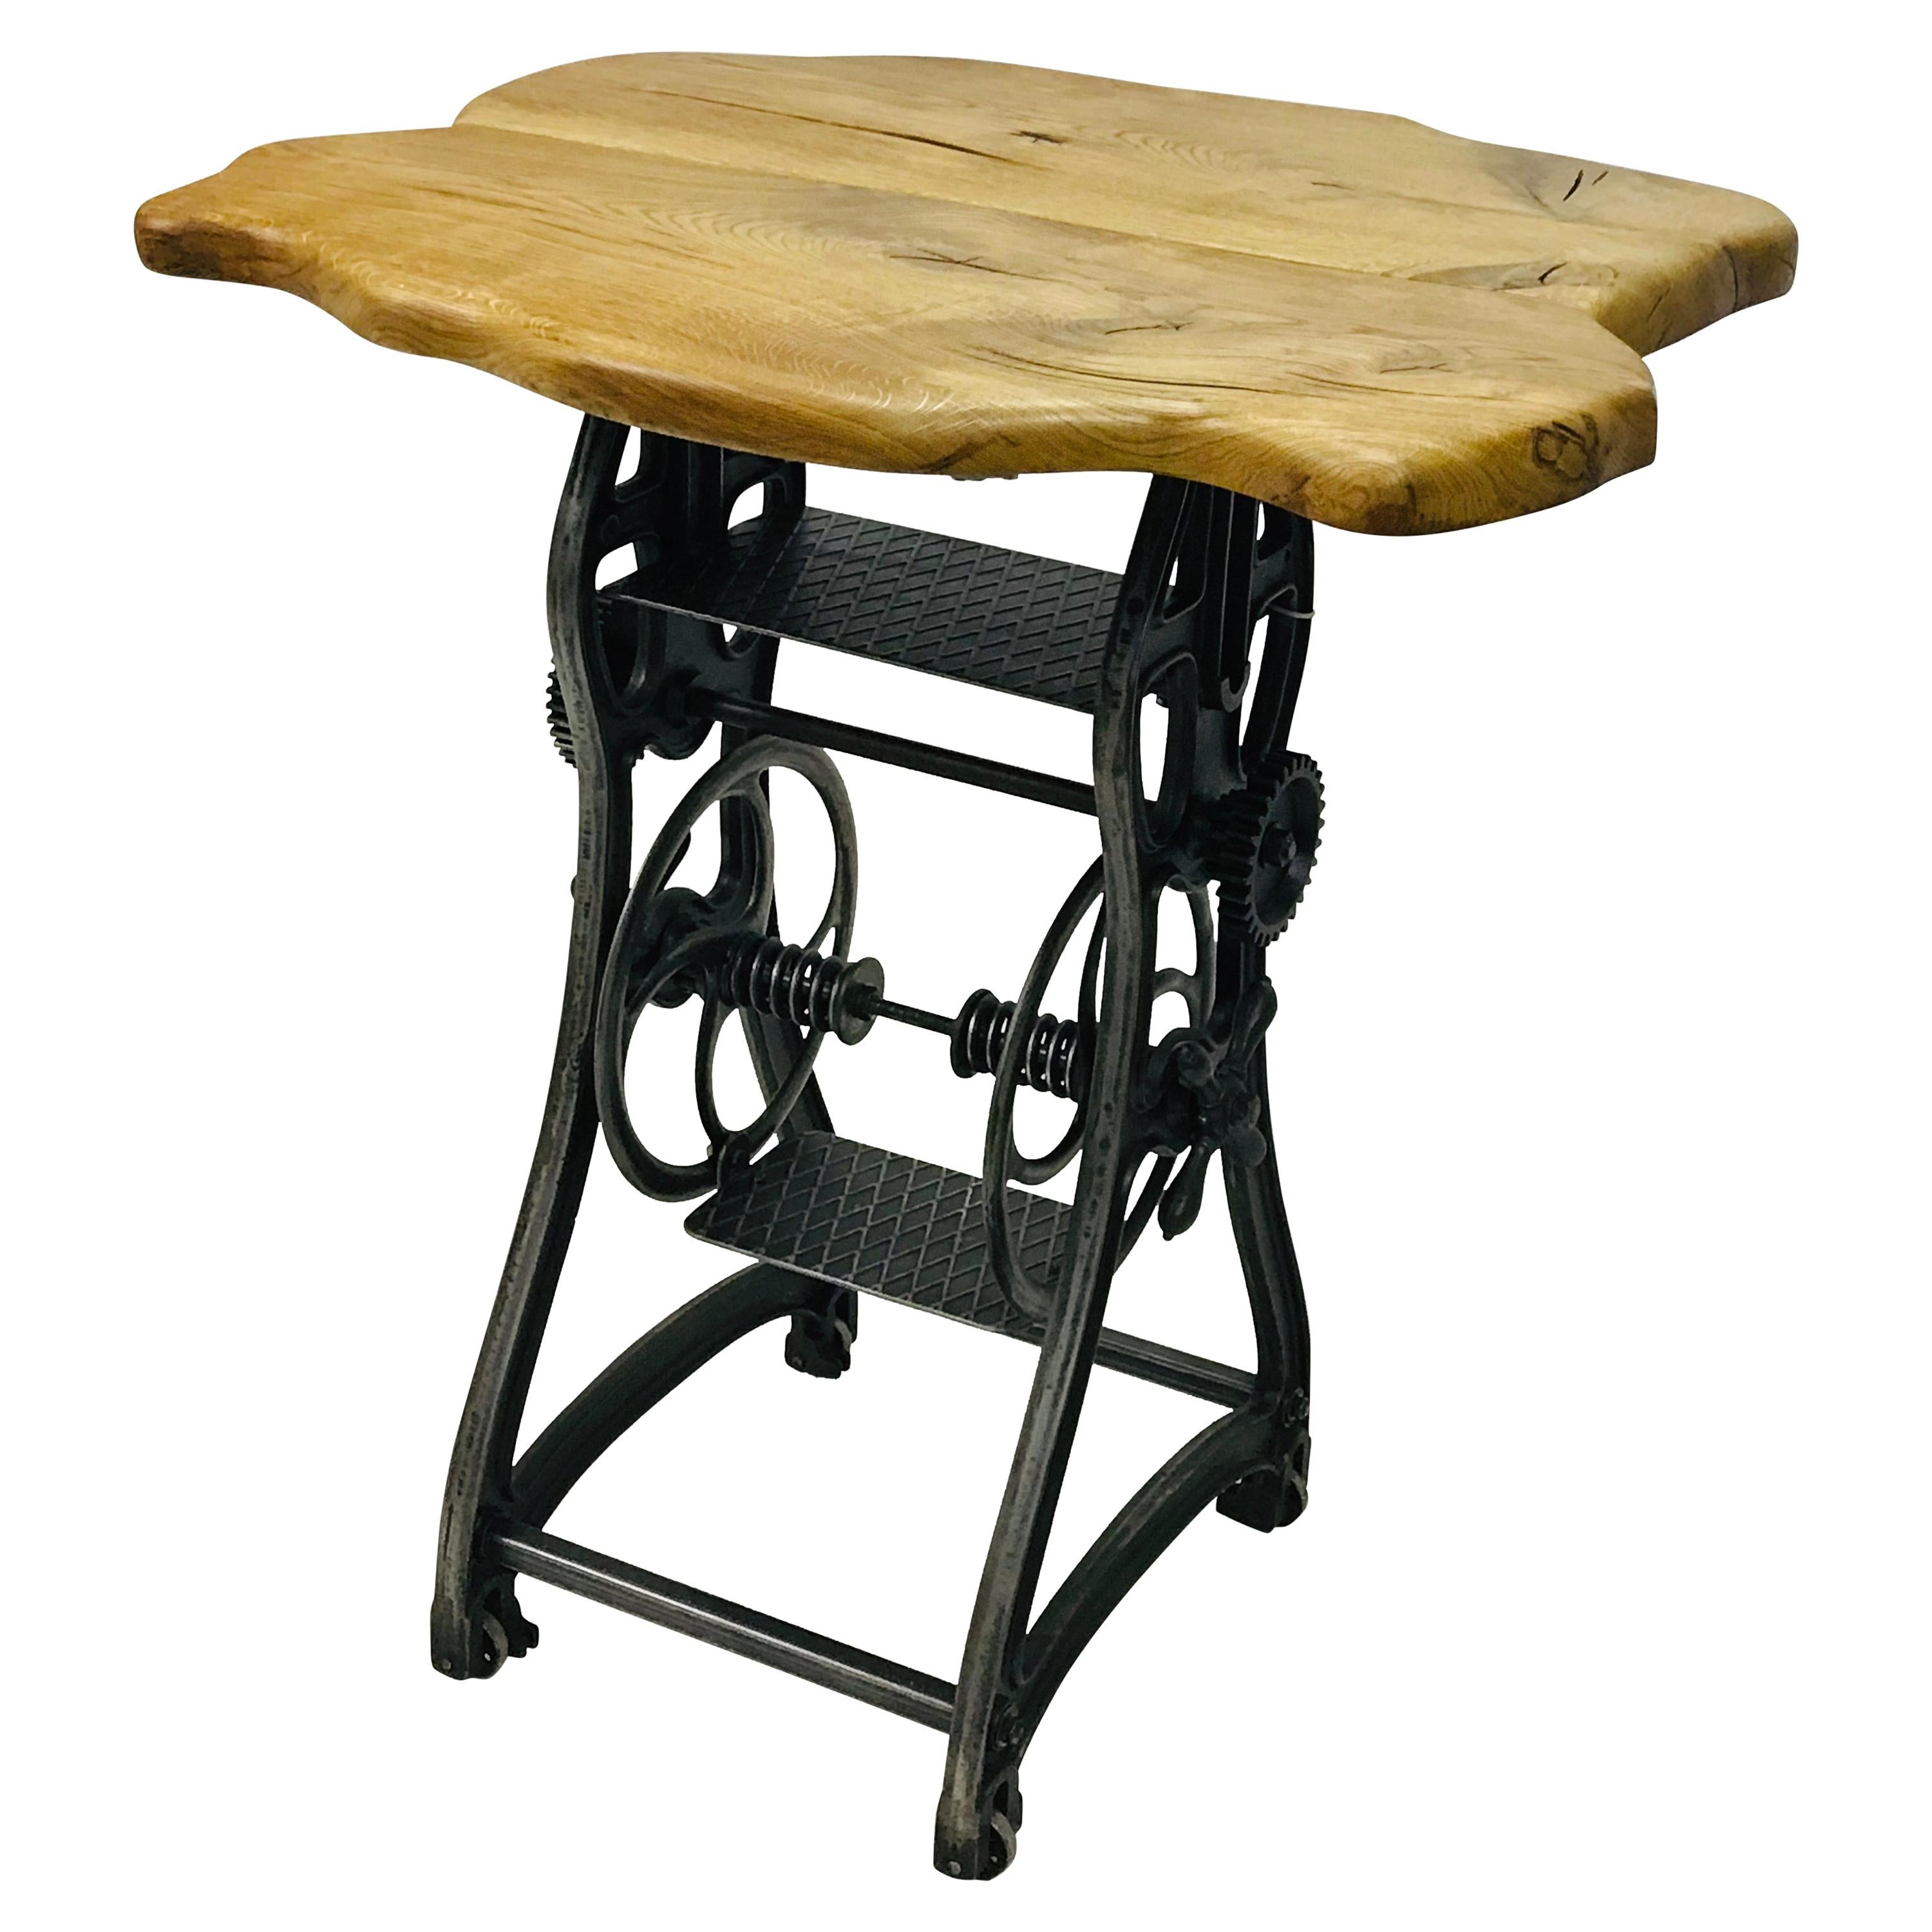 The Industrial Bar Table For Sale